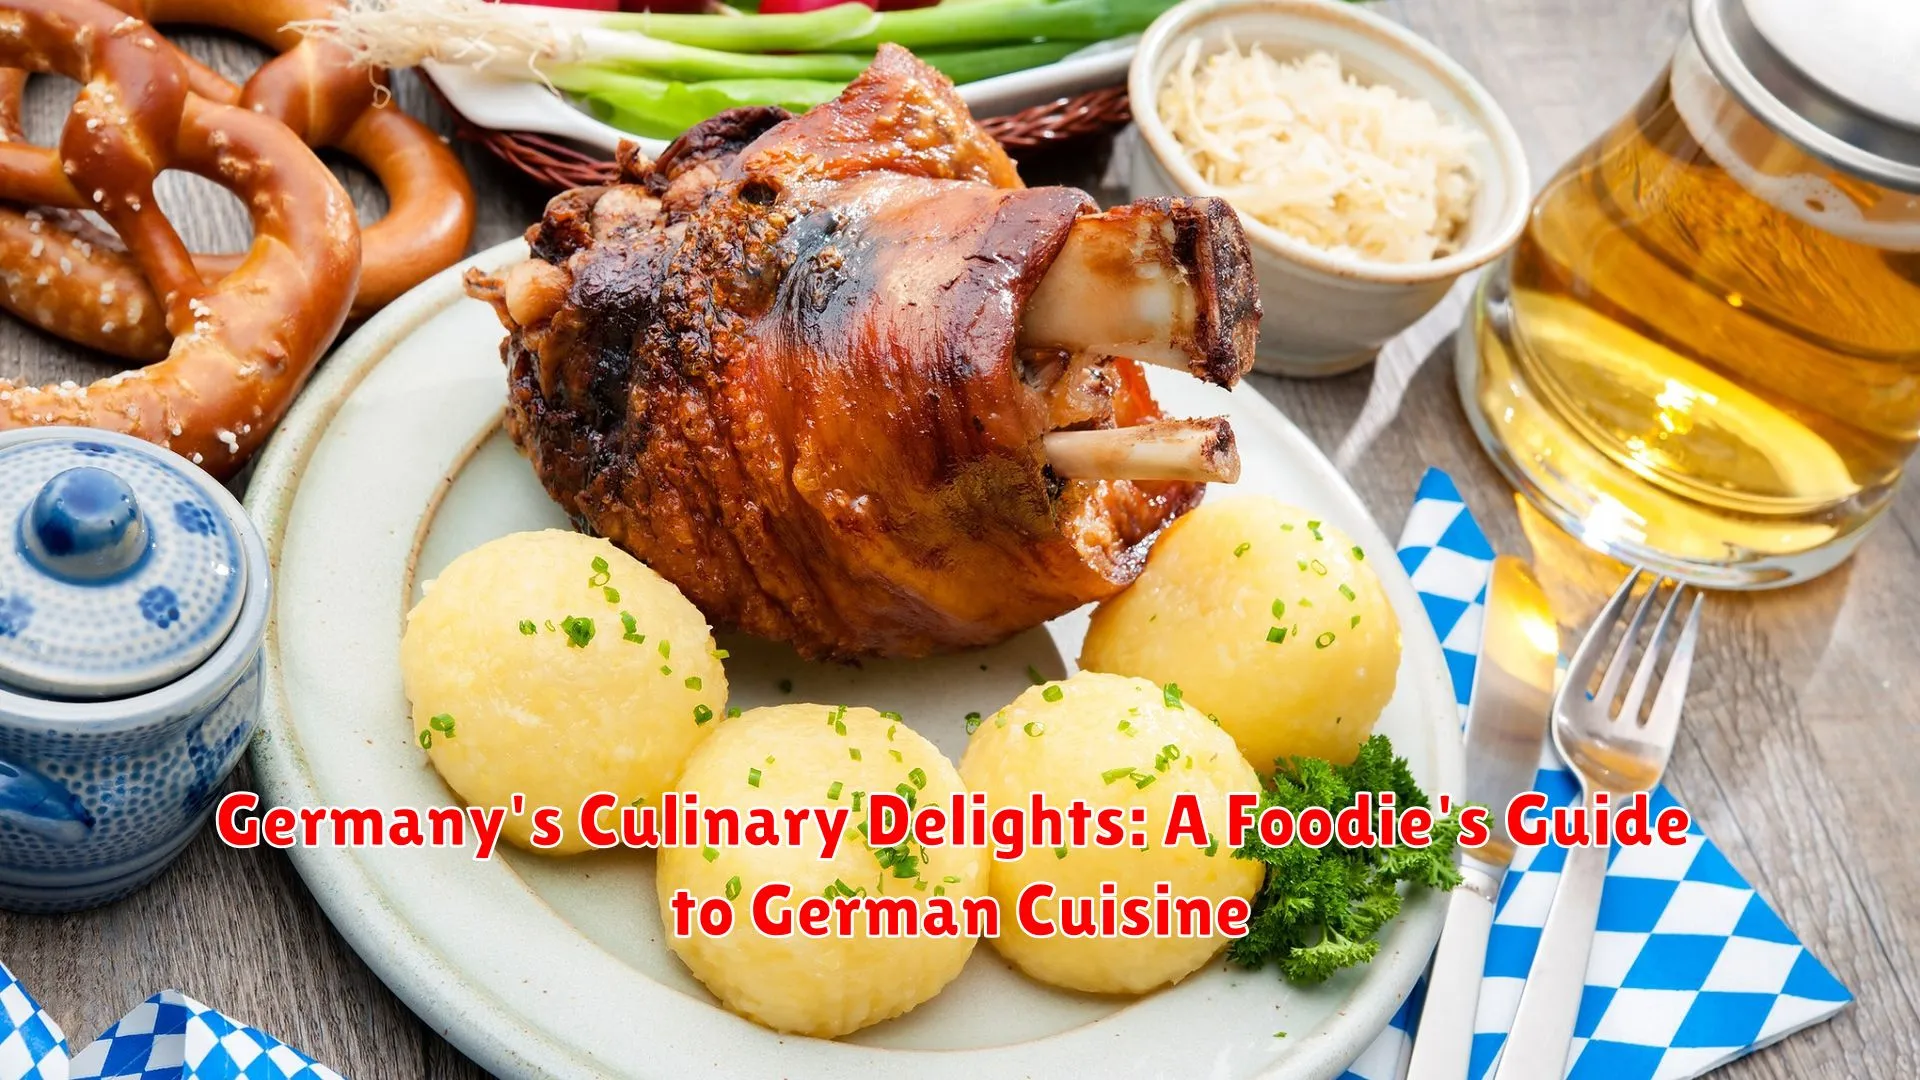 Germany's Culinary Delights: A Foodie's Guide to German Cuisine